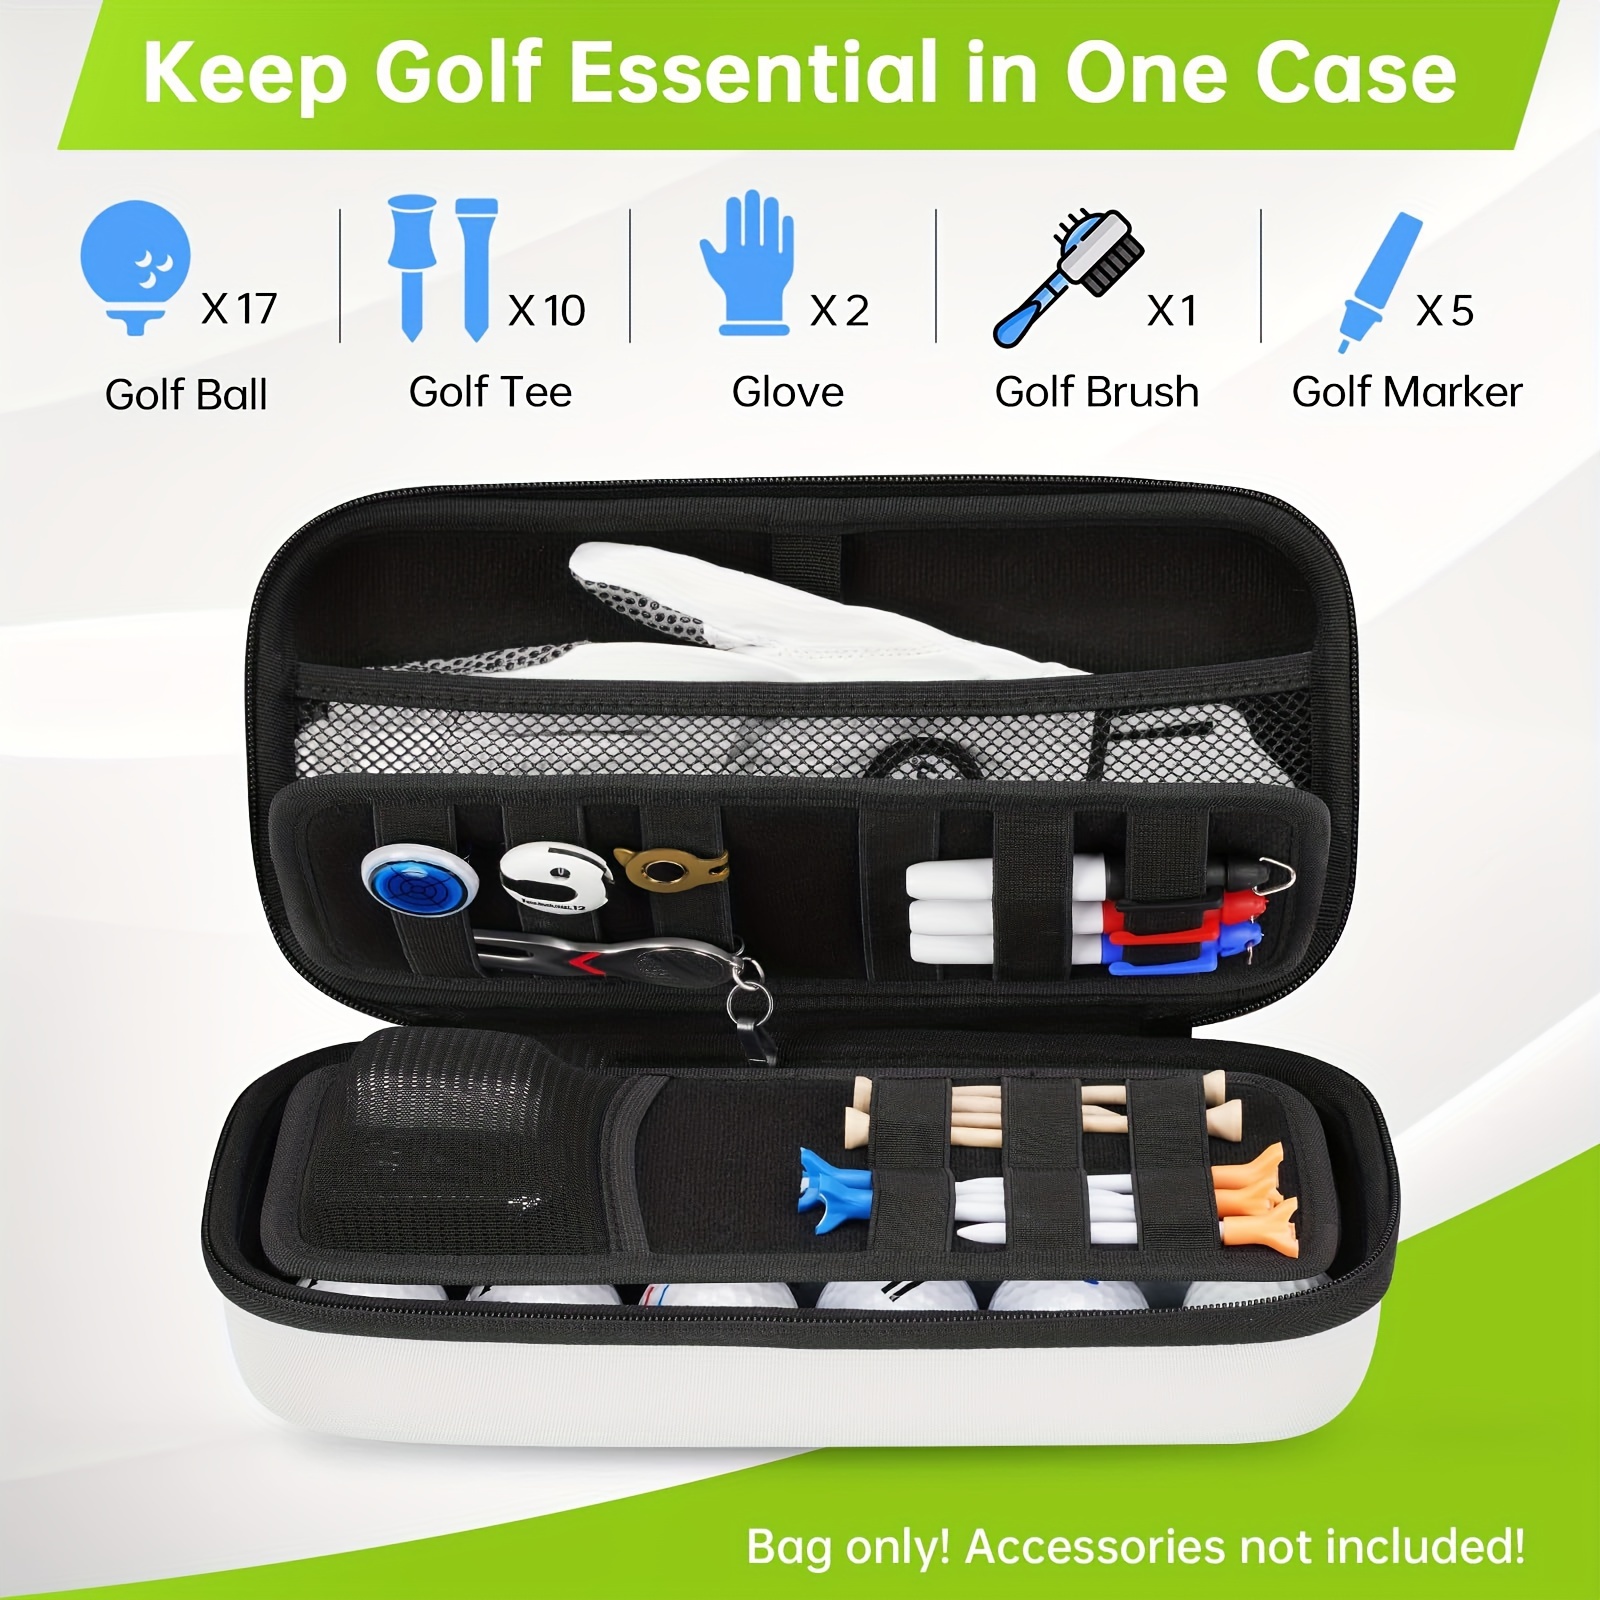 1pc golf glove holder with removable golf glove shaper with 2 dividers for balls golf tees divot tools storage golf gifts for men bag only nou included accessories details 1